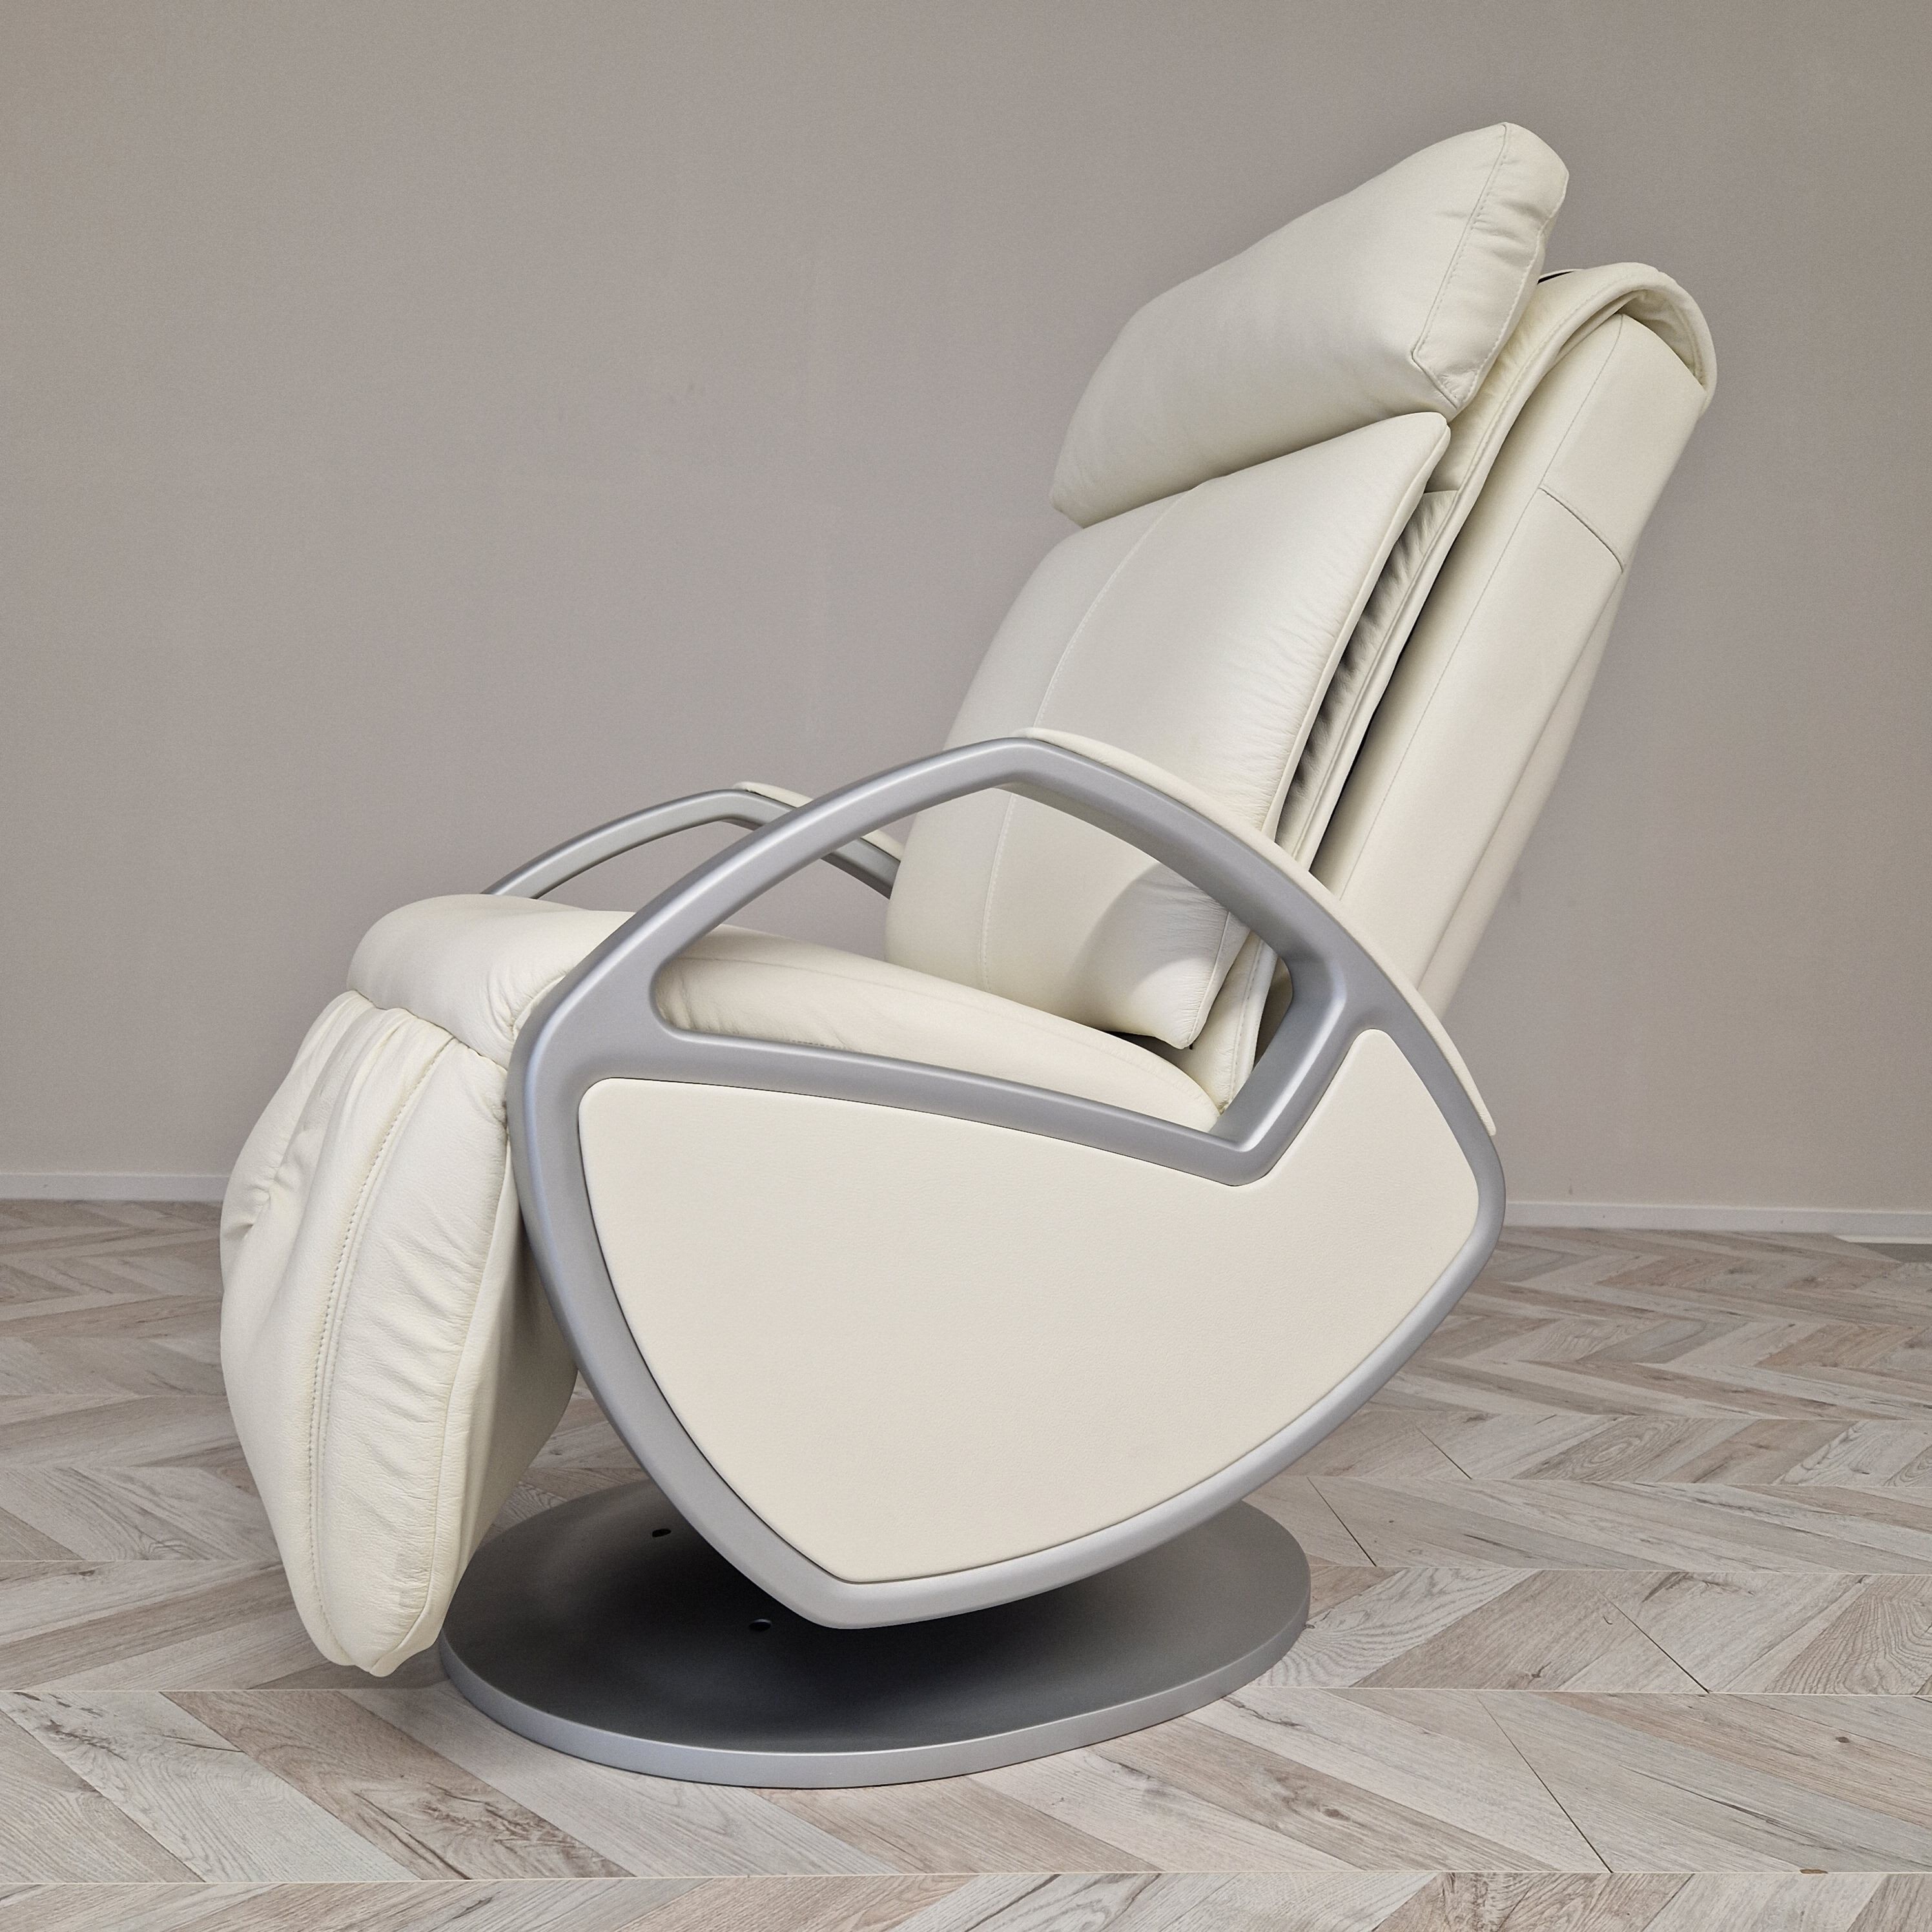 Massagesessel Keyton Space H10 in weiss - Sale